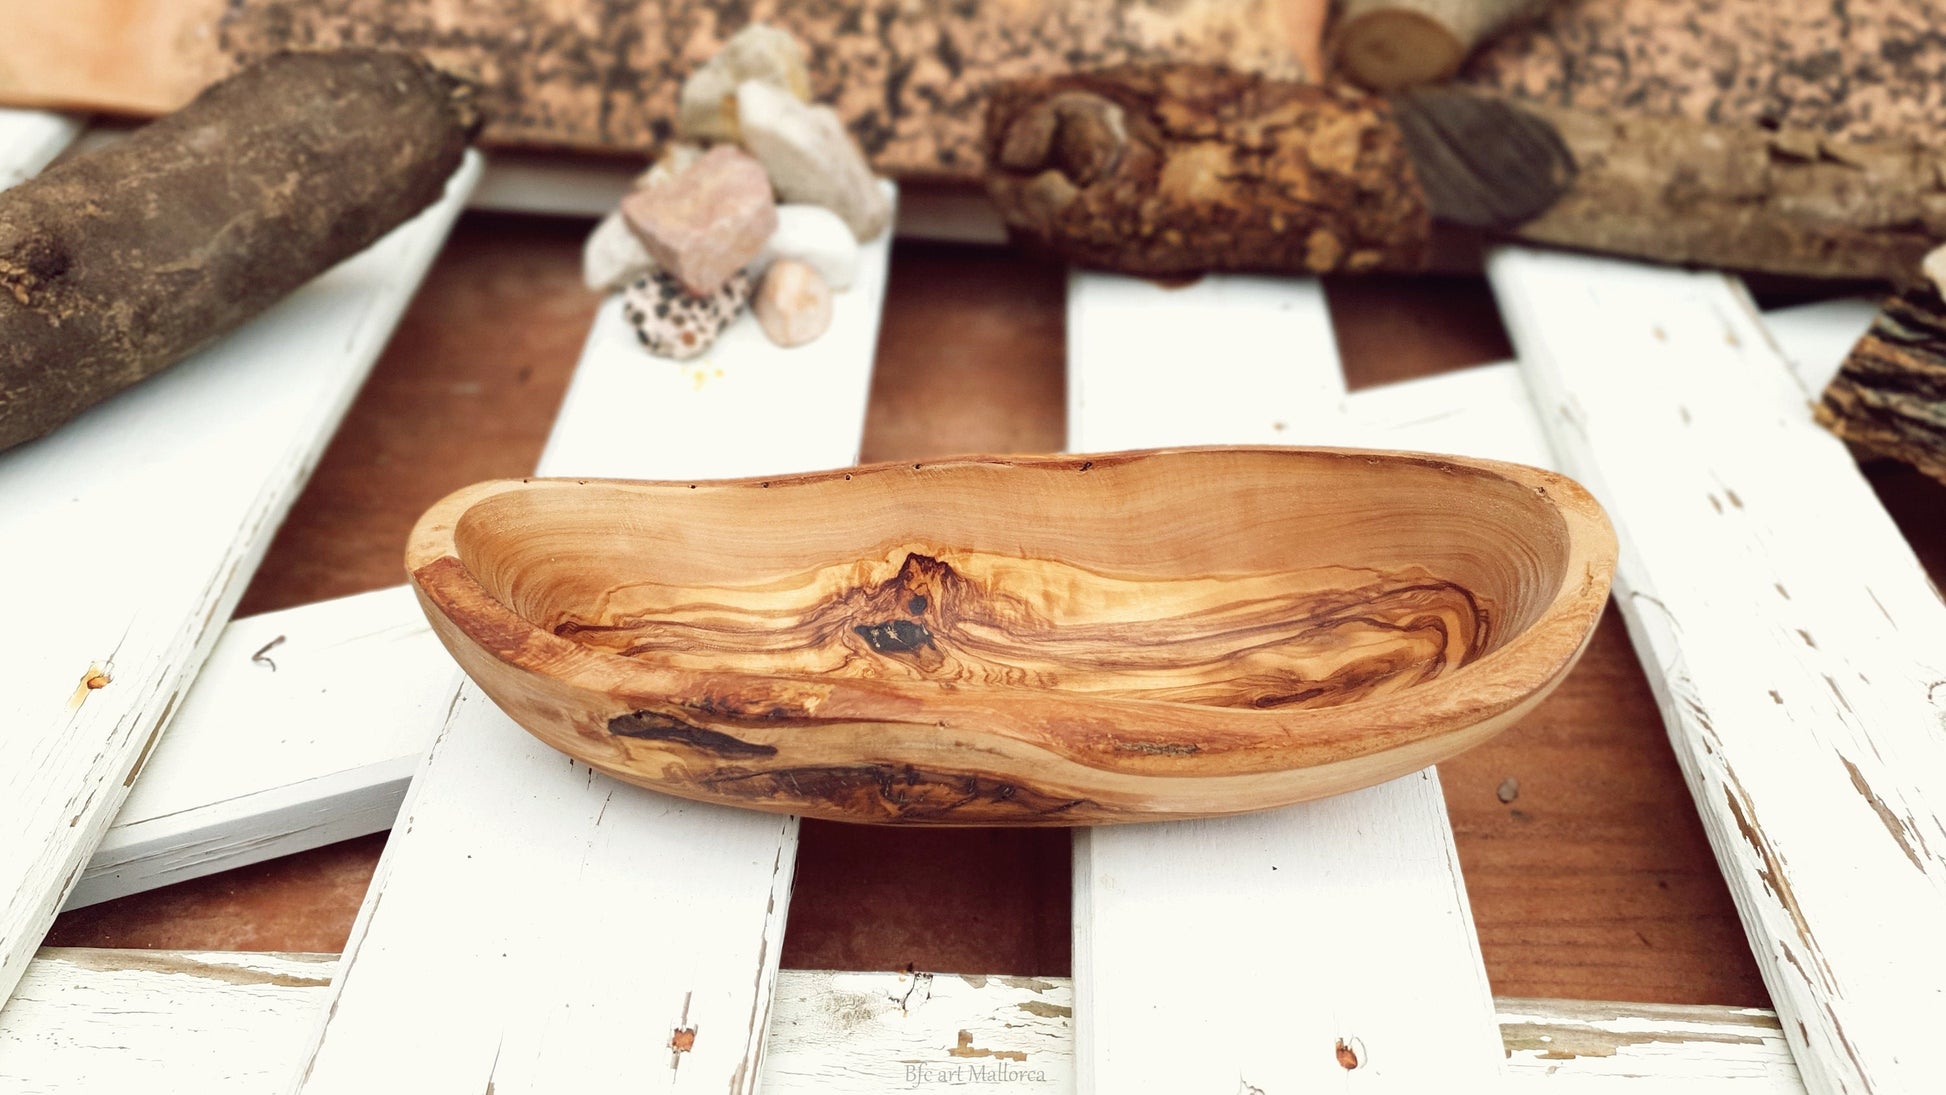 Irregular elongated bowl with organic shapes. Boat-shaped bowl with irregular upper rims and natural bark from the trunk.